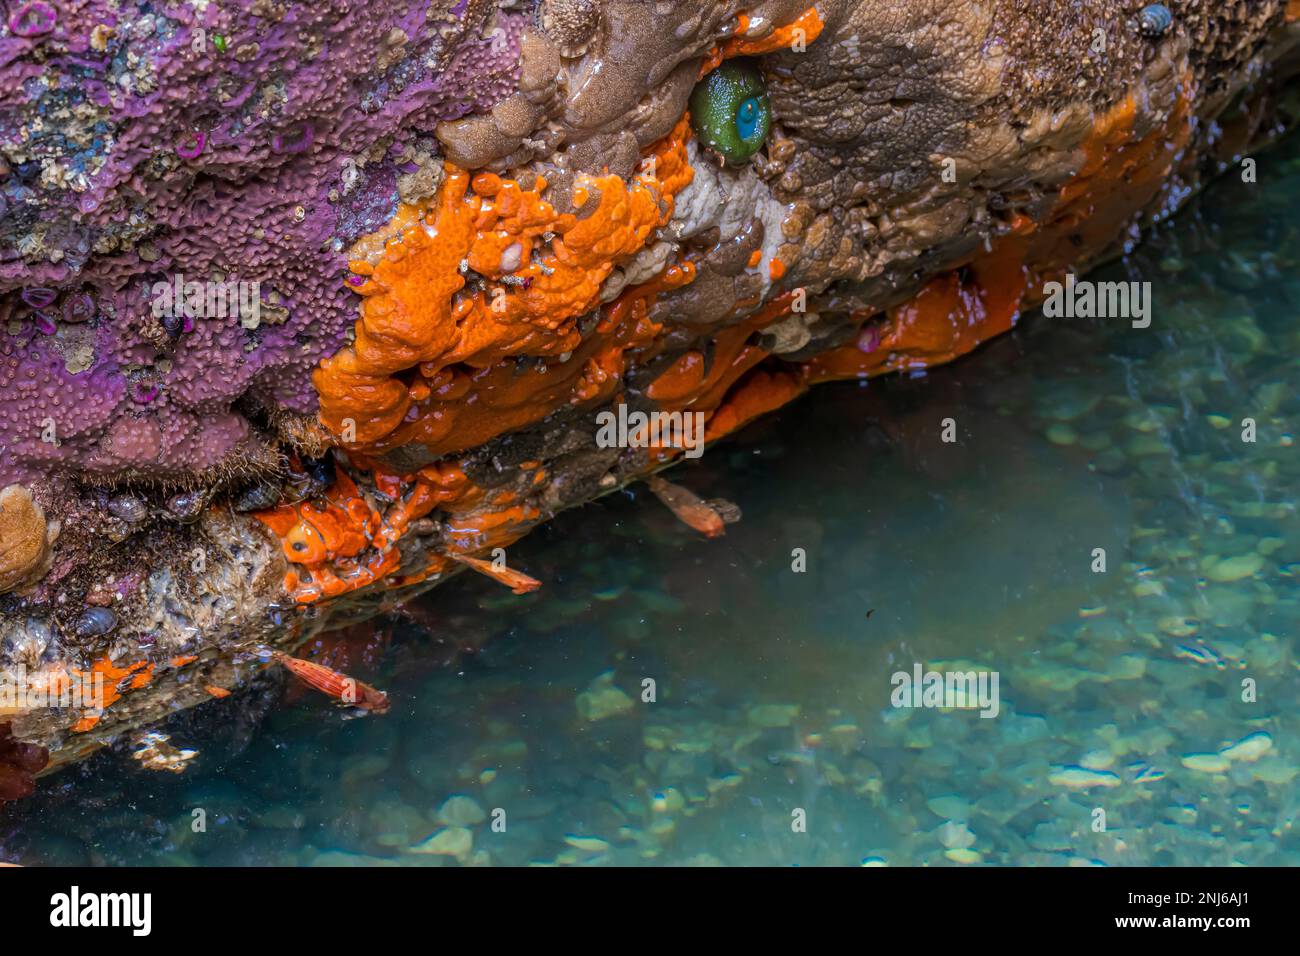 Pacific Sea Pork, Aplidium californicum, (orange and brown) a colonial encrusting tunicate at Point of Arches in Olympic National Park, Washington Sta Stock Photo